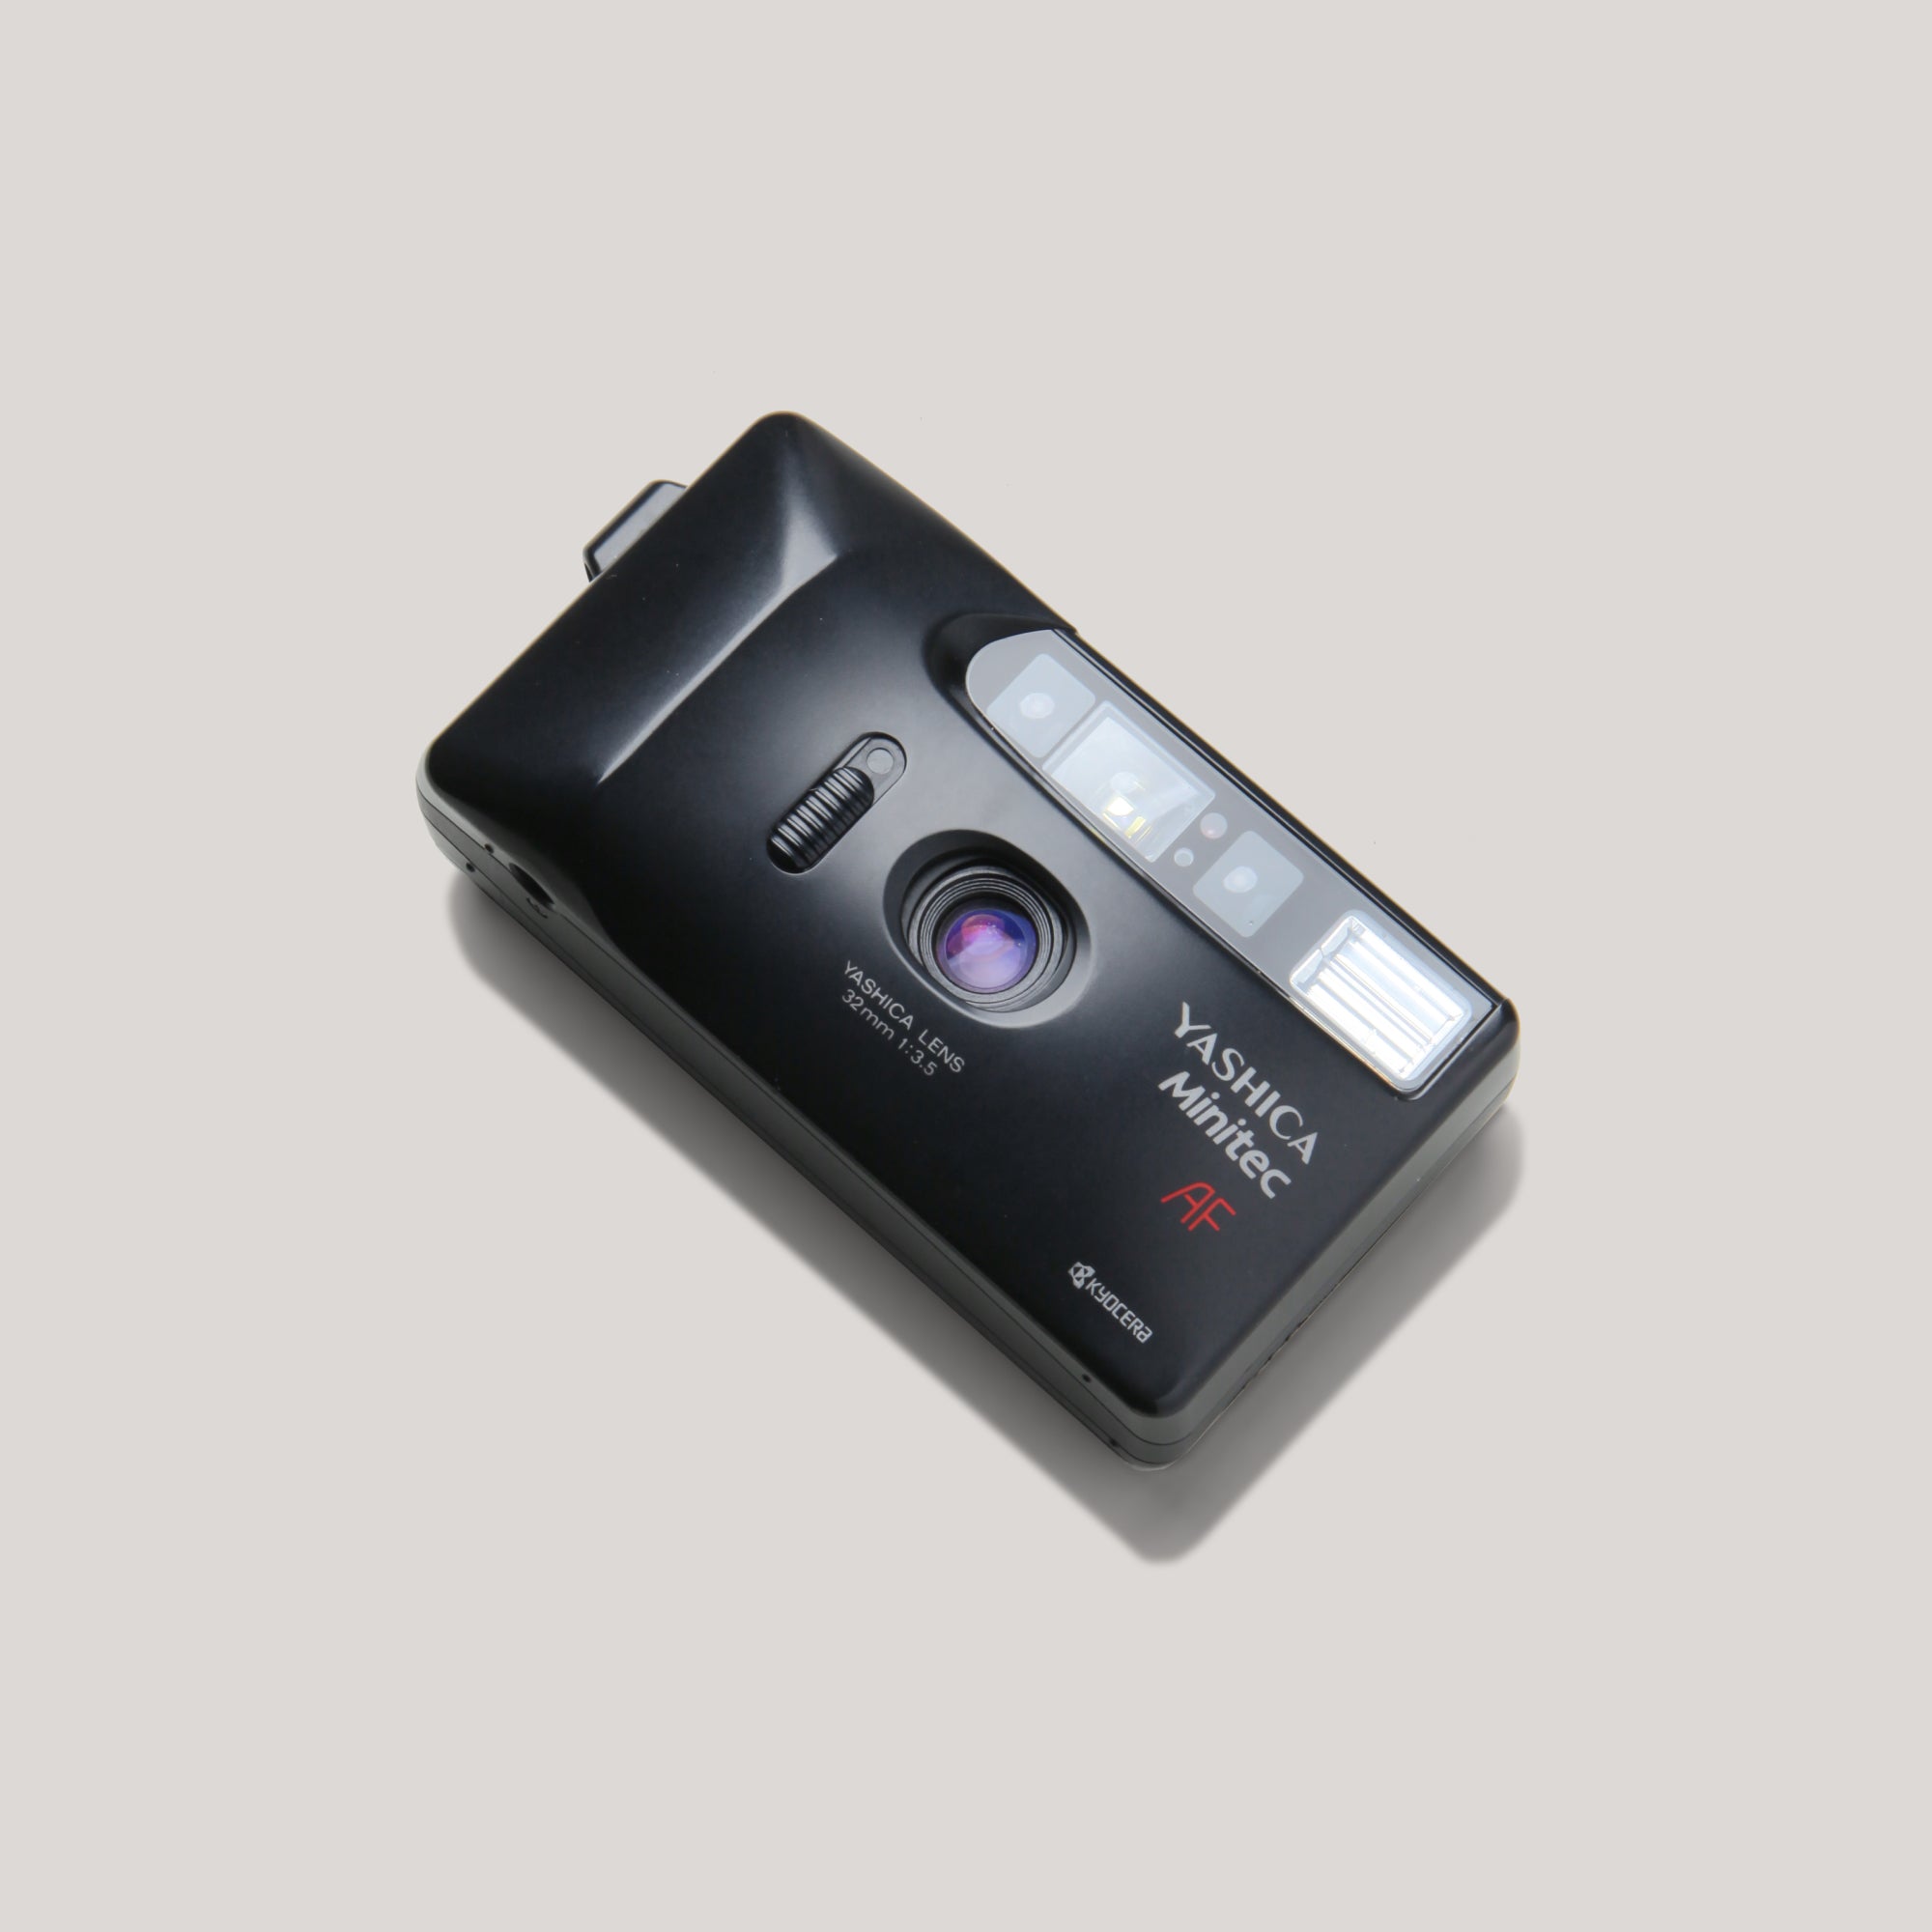 Buy Yashica Minitec AF now at Analogue Amsterdam